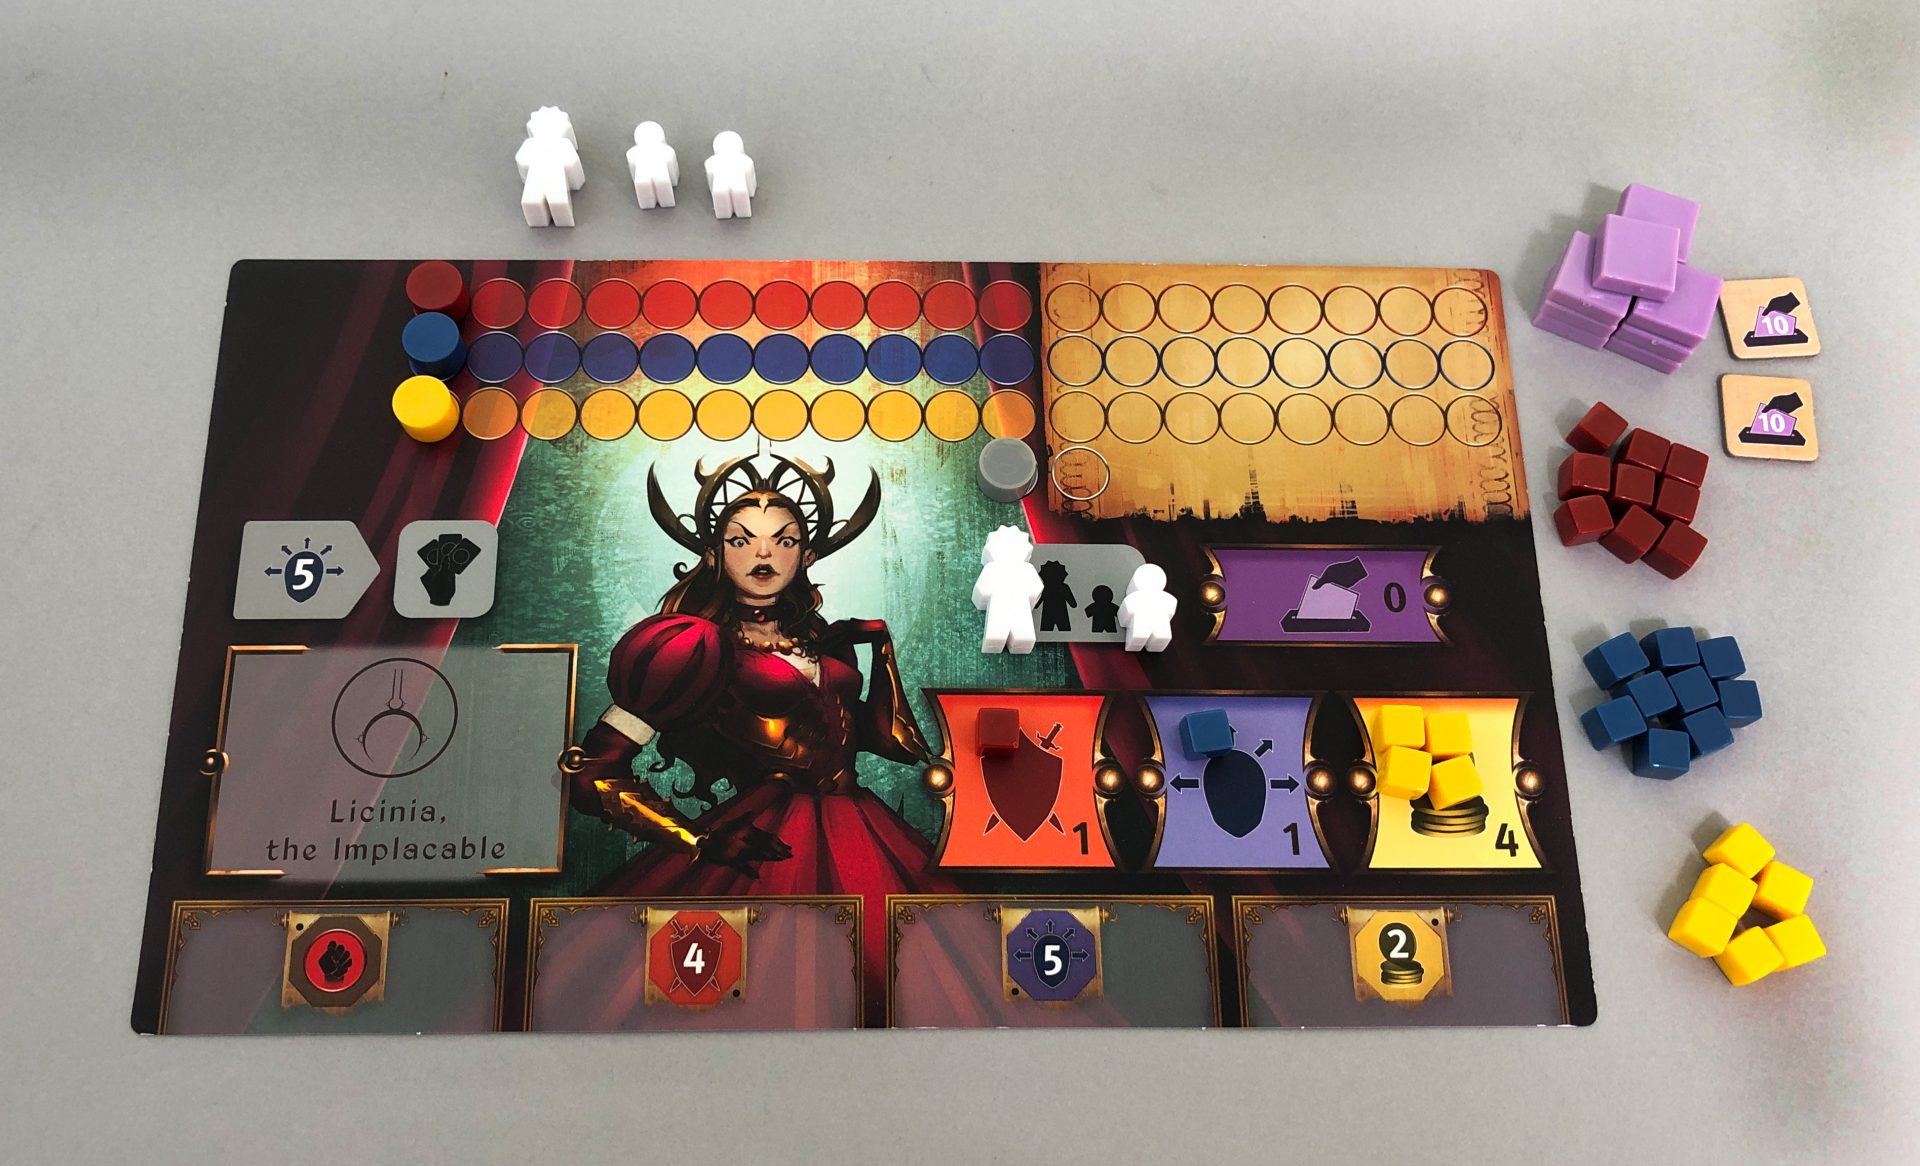 Licinia the Implacable's player board and tokens.